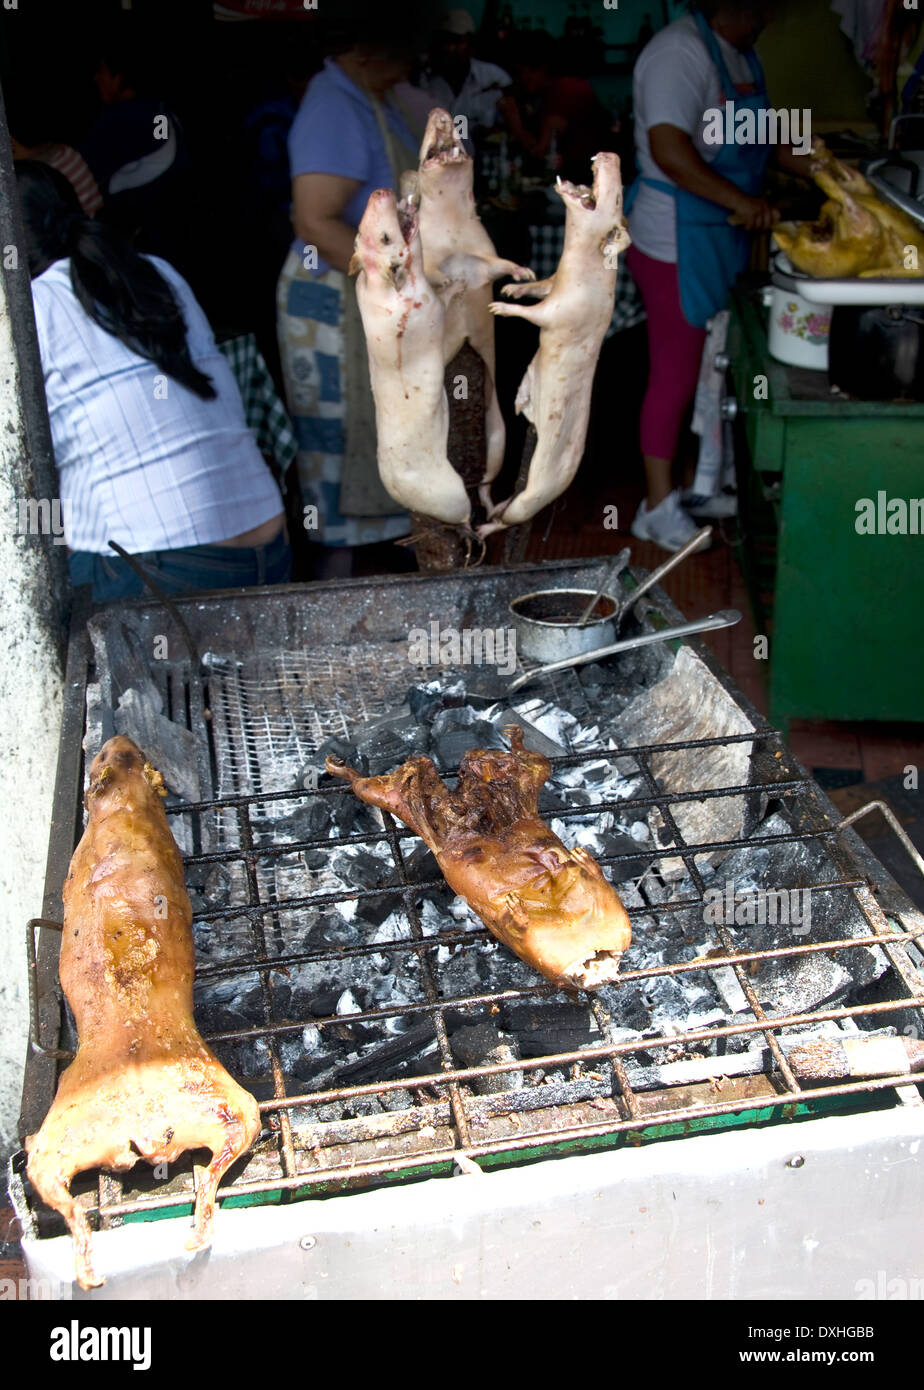 Marinated, roasted Cuy (Guinea Pig), a local delicacy, on a barbecue at the outdoor food market in Banios, Ecuador Stock Photo